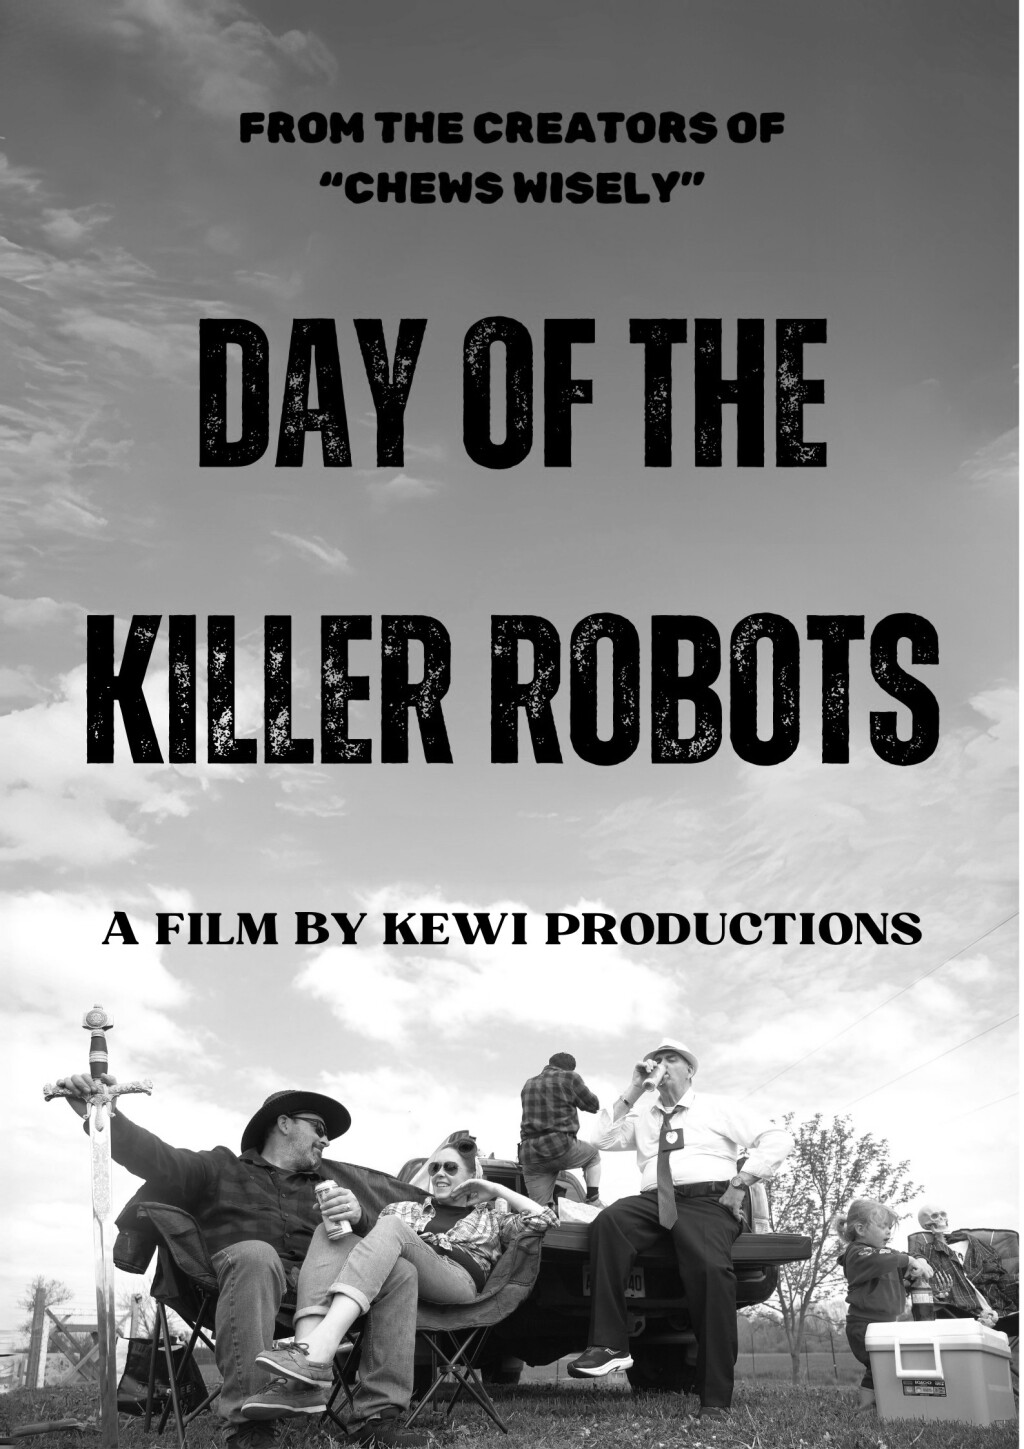 Filmposter for Day of the Killer Robots